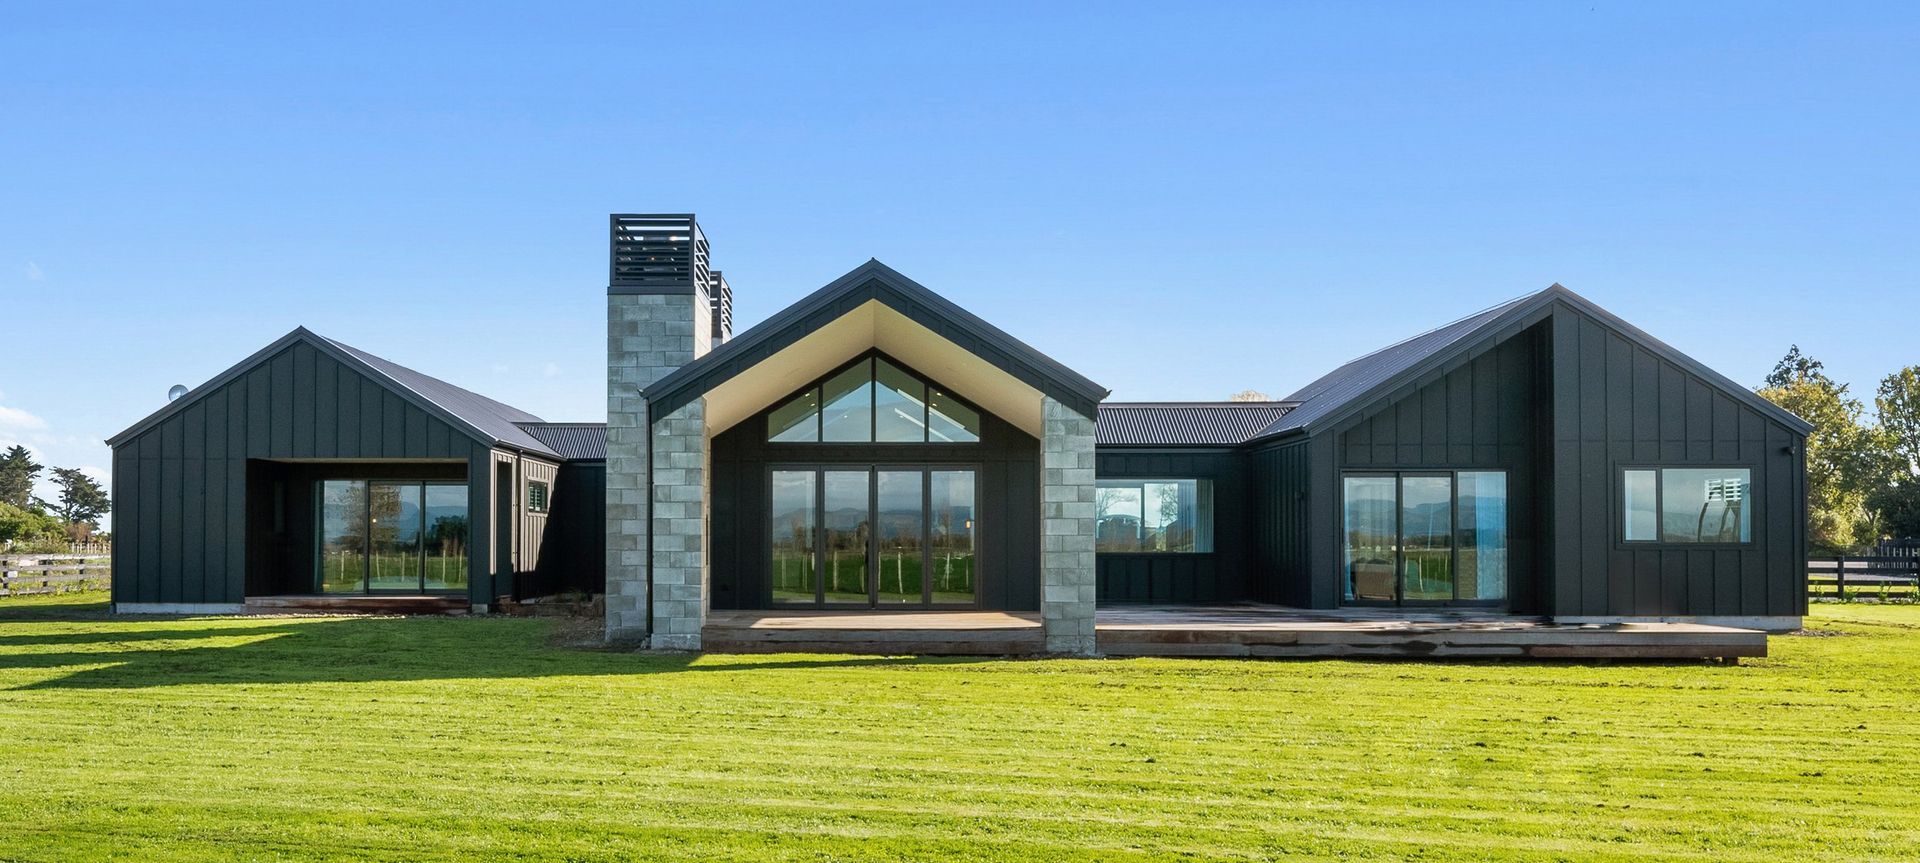 Turbine Residential was recognised this year when it won the 2023 Master Builders Gold - Altus Window System New Home $750-$1 million category for the impeccable Aranui Rd project.